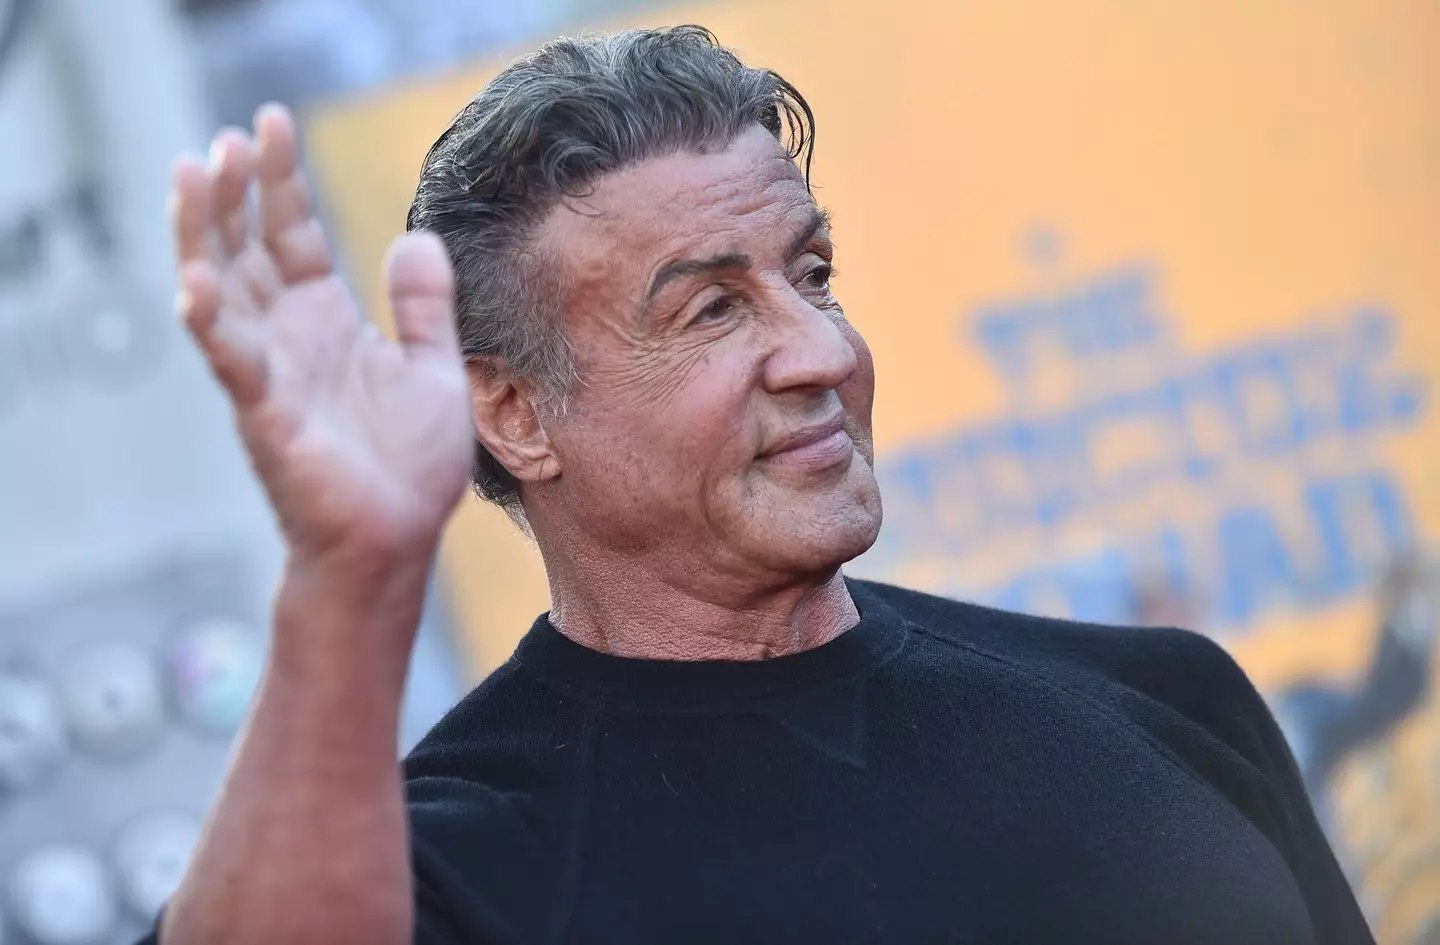 Sylvester Stallone has expressed his regret over not being involved with Creed III.